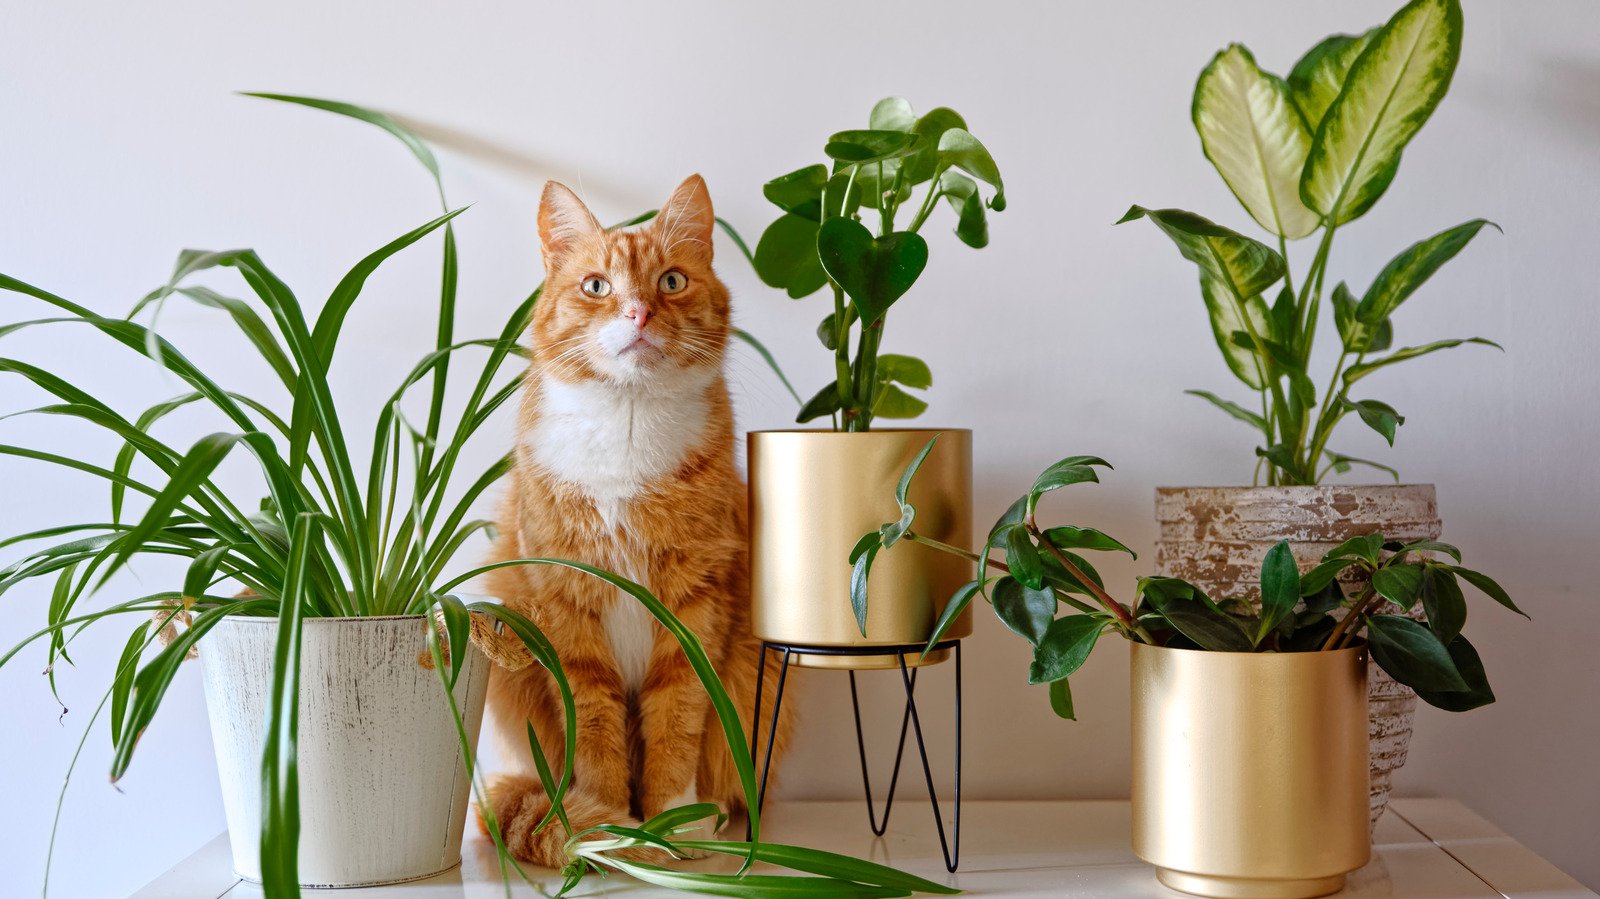 The Houseplants You Should Avoid If You Have Cats - House Digest